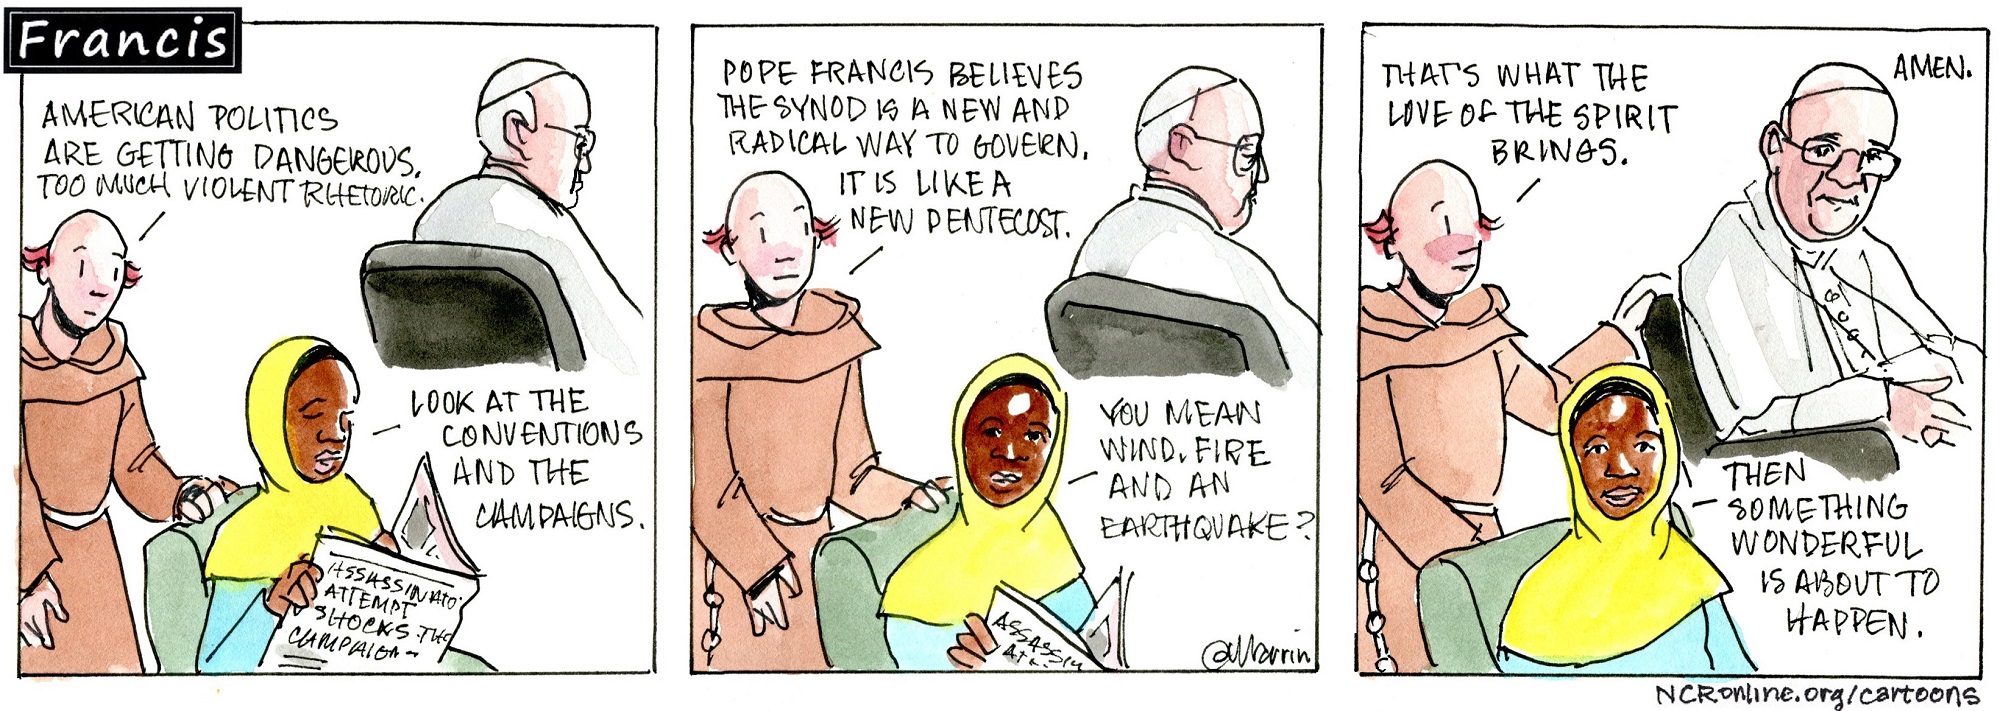 Francis, the comic strip: American politics are getting dangerous. Yet Francis believes the synod is a new and radical way to govern.